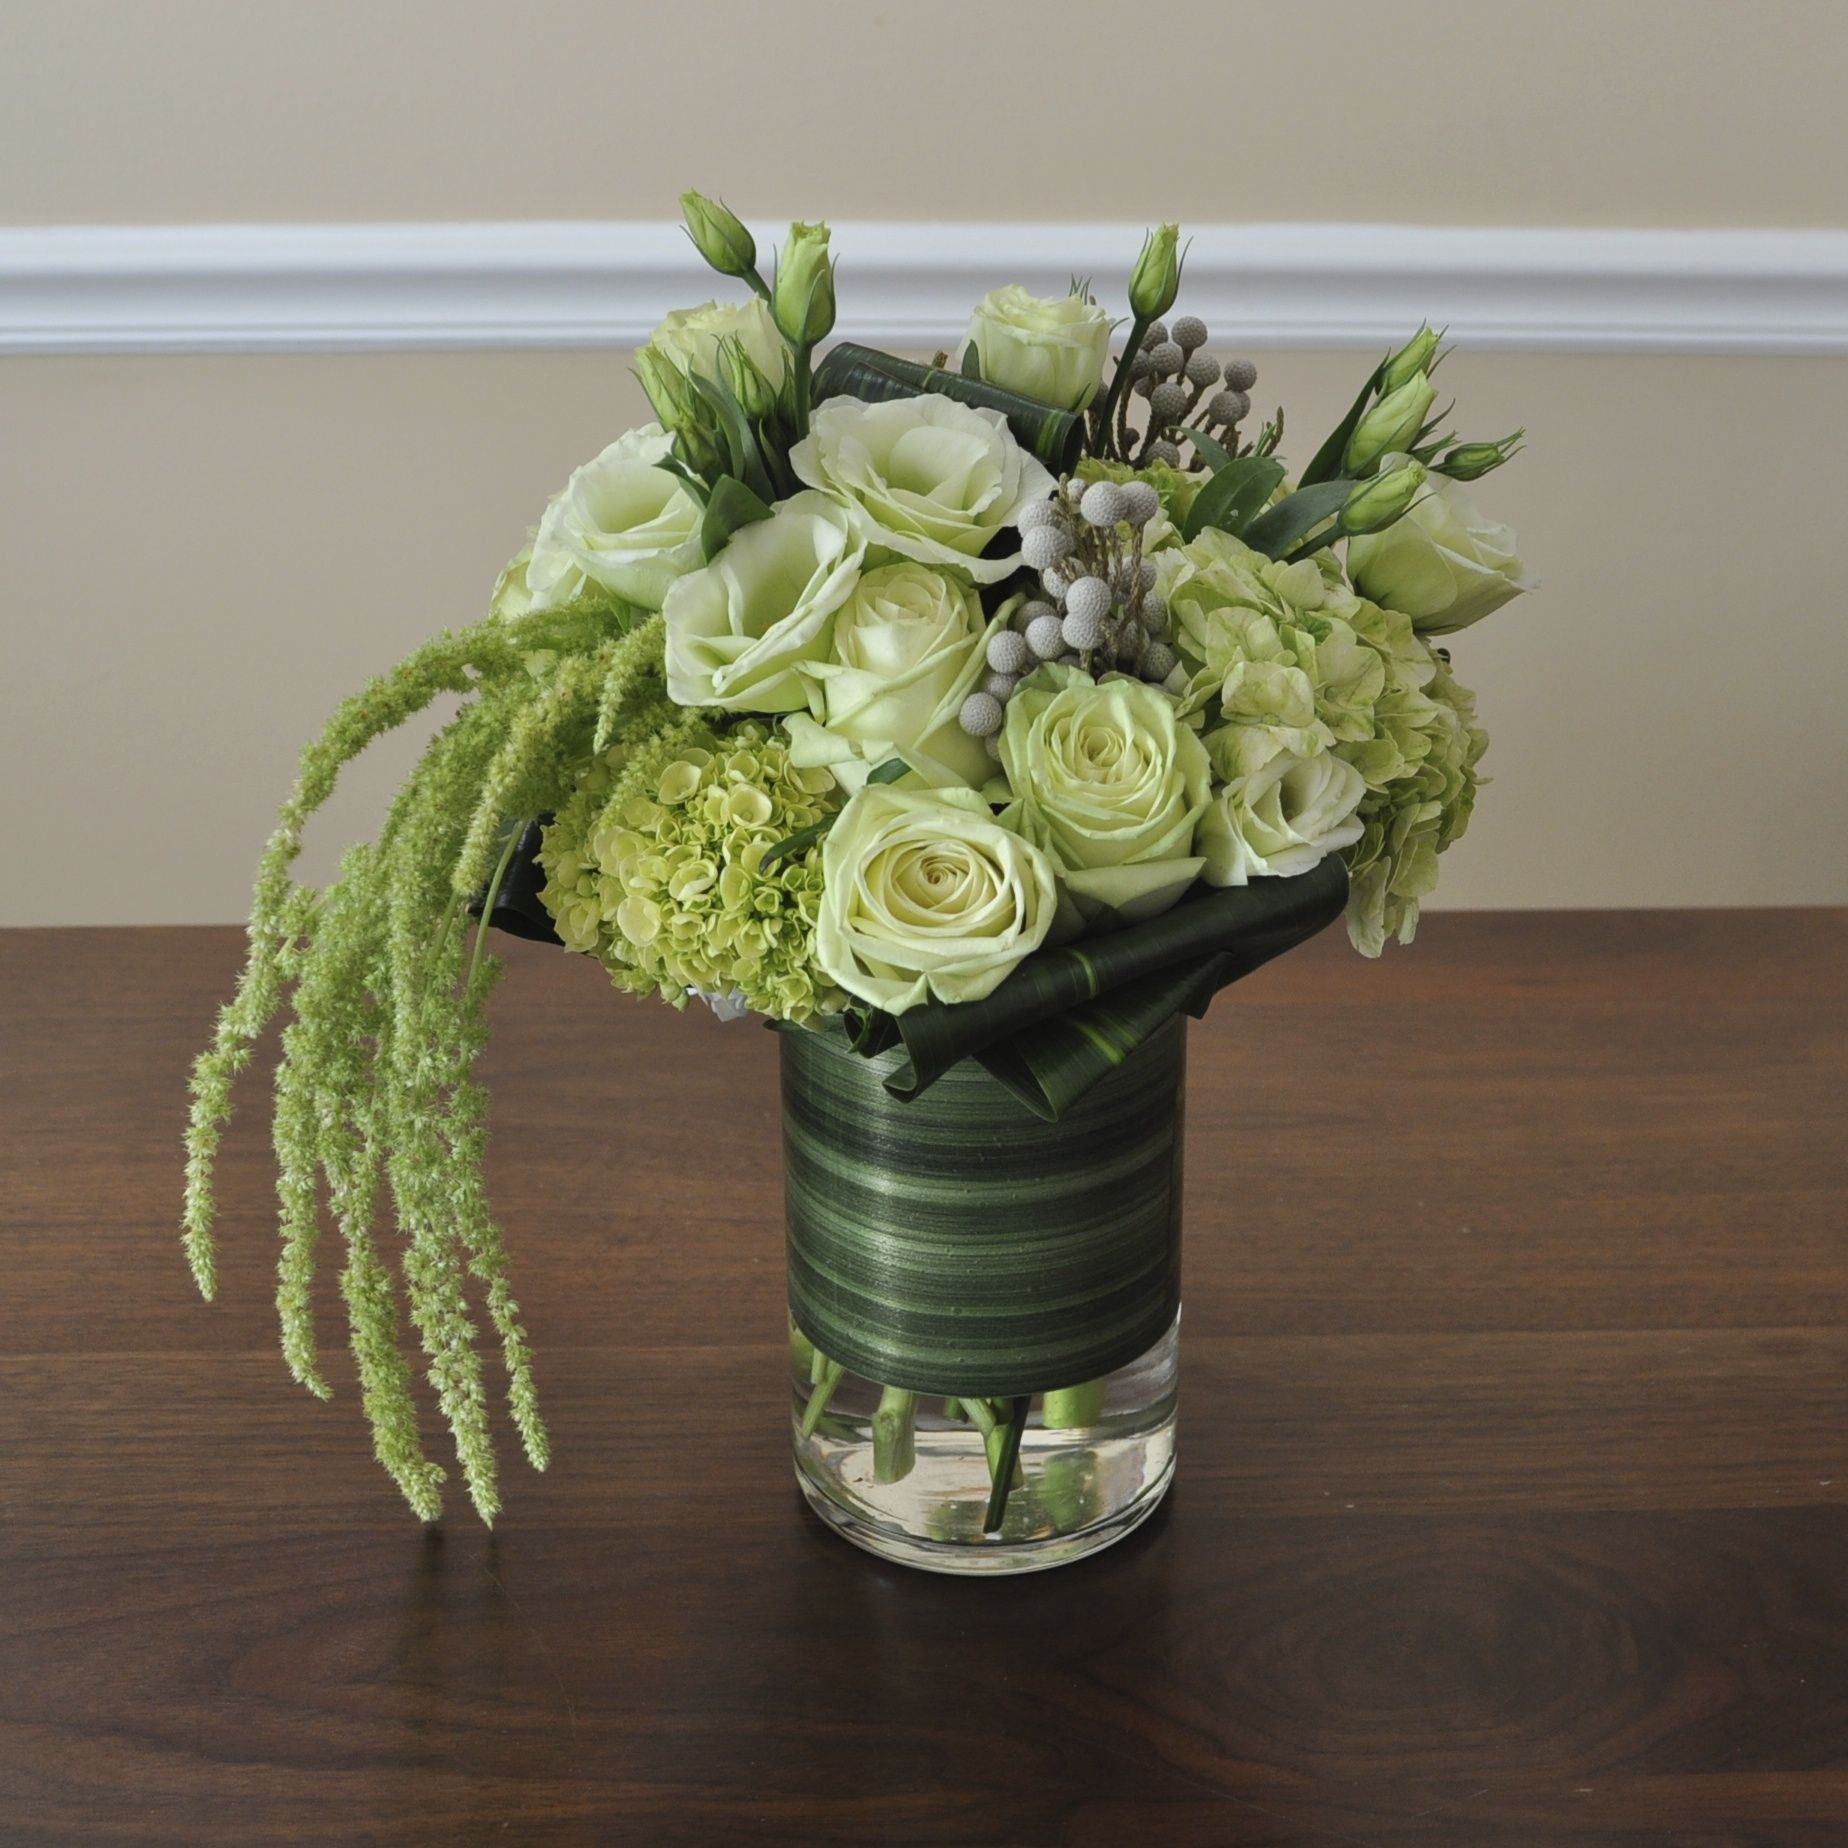 21 Recommended Custom Vase Flower Delivery 2024 free download custom vase flower delivery of birthday flower arrangement for a young lady who loves greens and with regard to birthday flower arrangement for a young lady who loves greens and whites and c